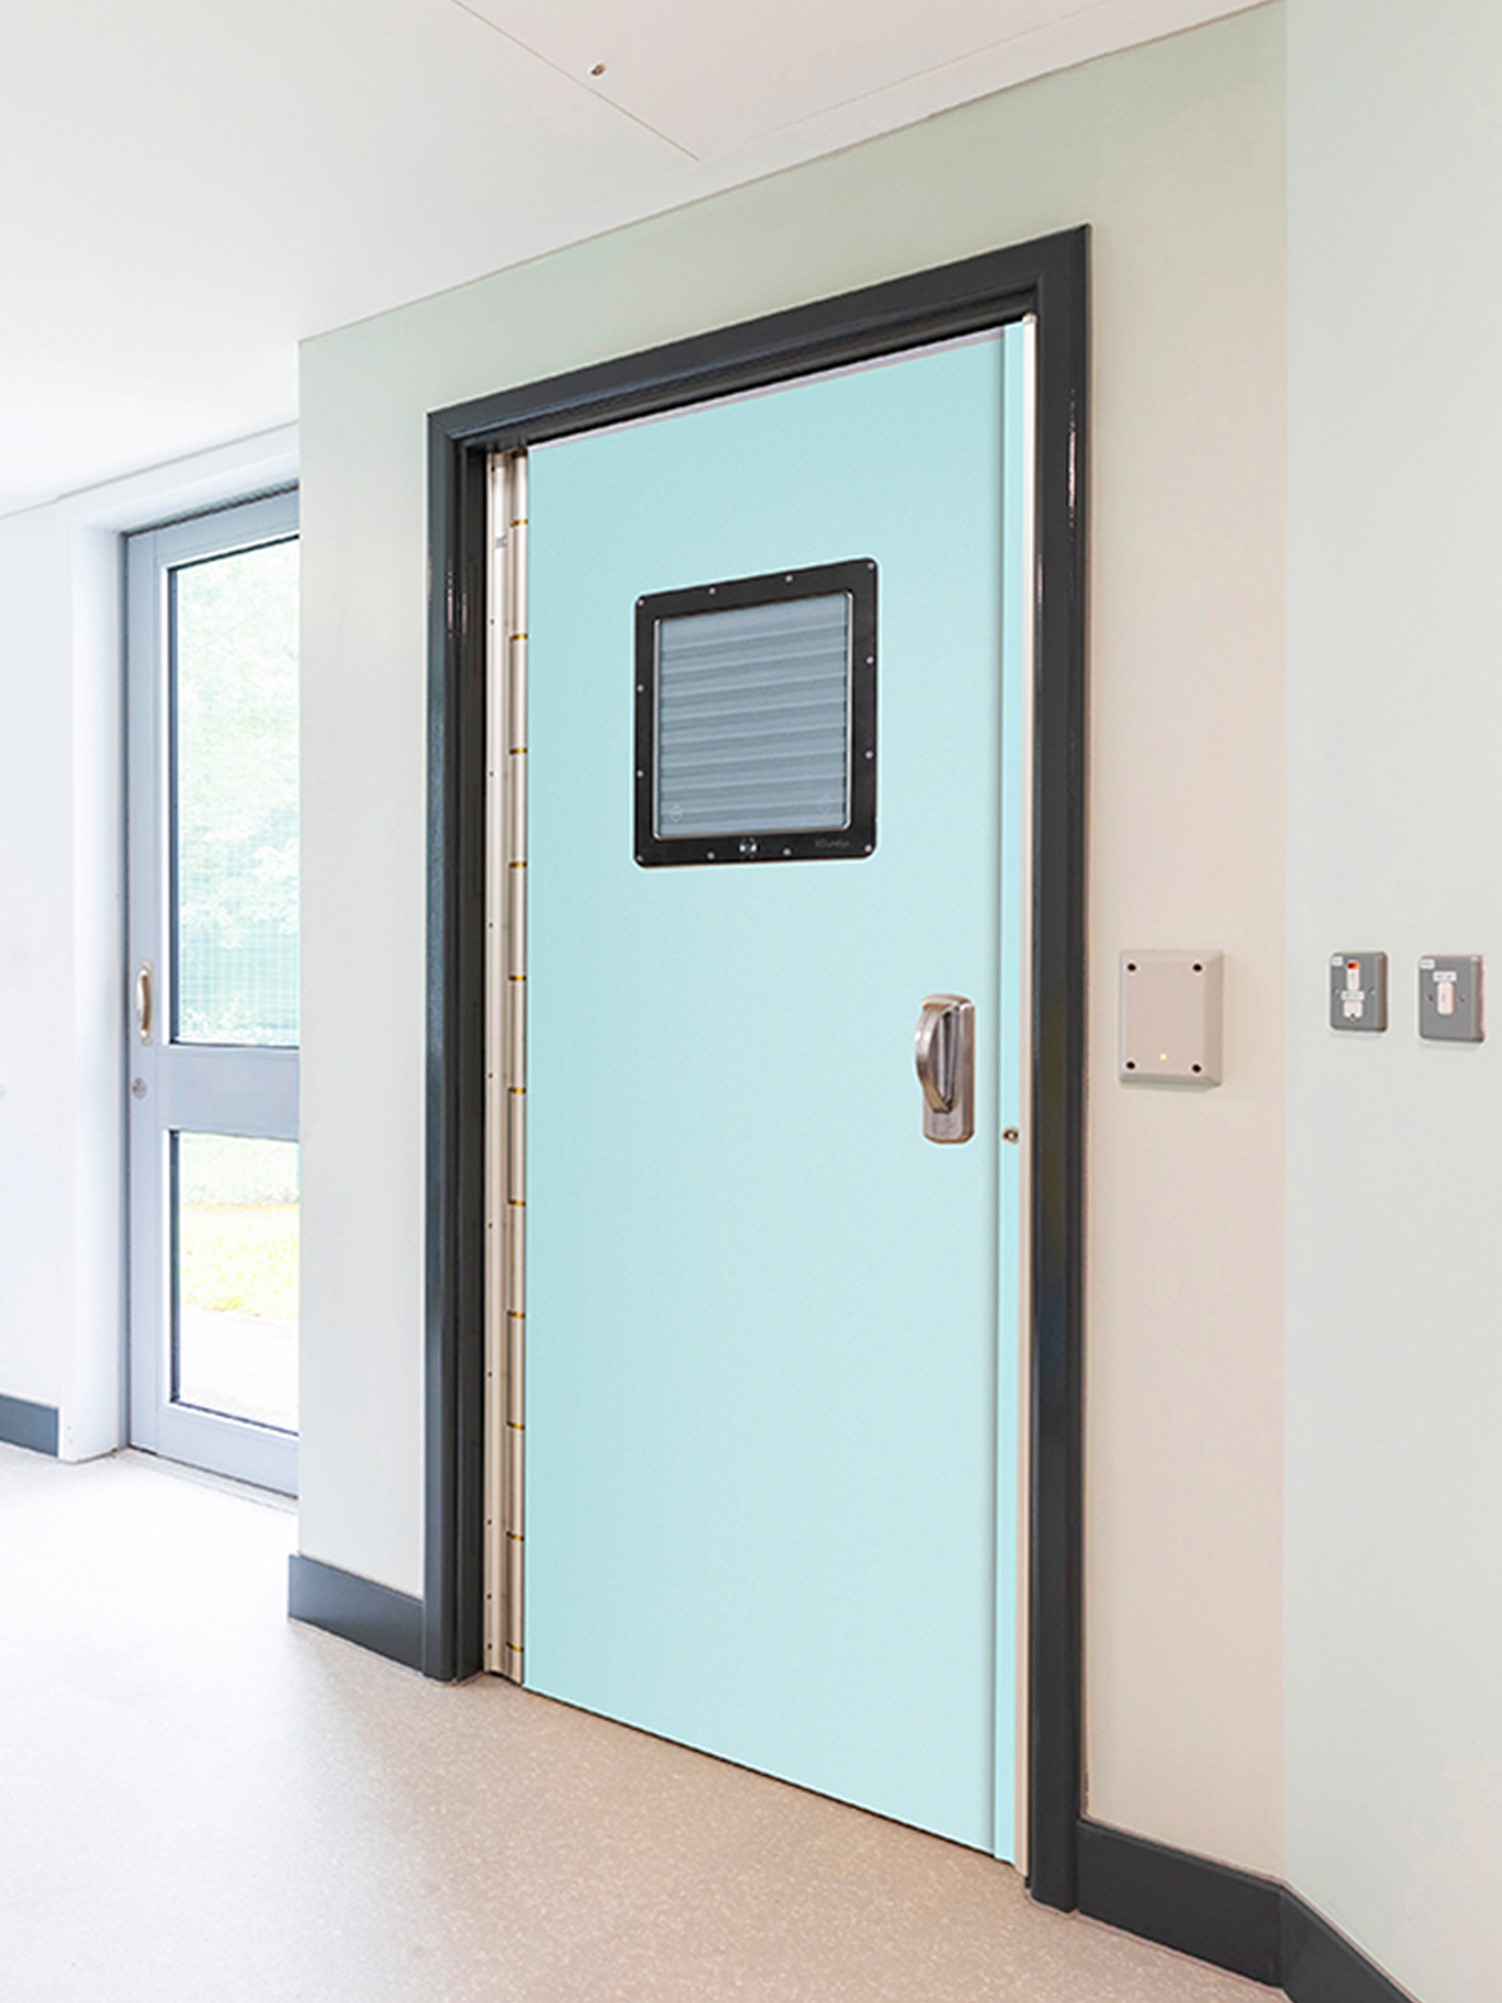 A ligature monitoring door system with anti-barricade capabilities, manufactured by Kingsway Group; a company specializing in ligature-resistant products to improve patient safety in behavioral health.